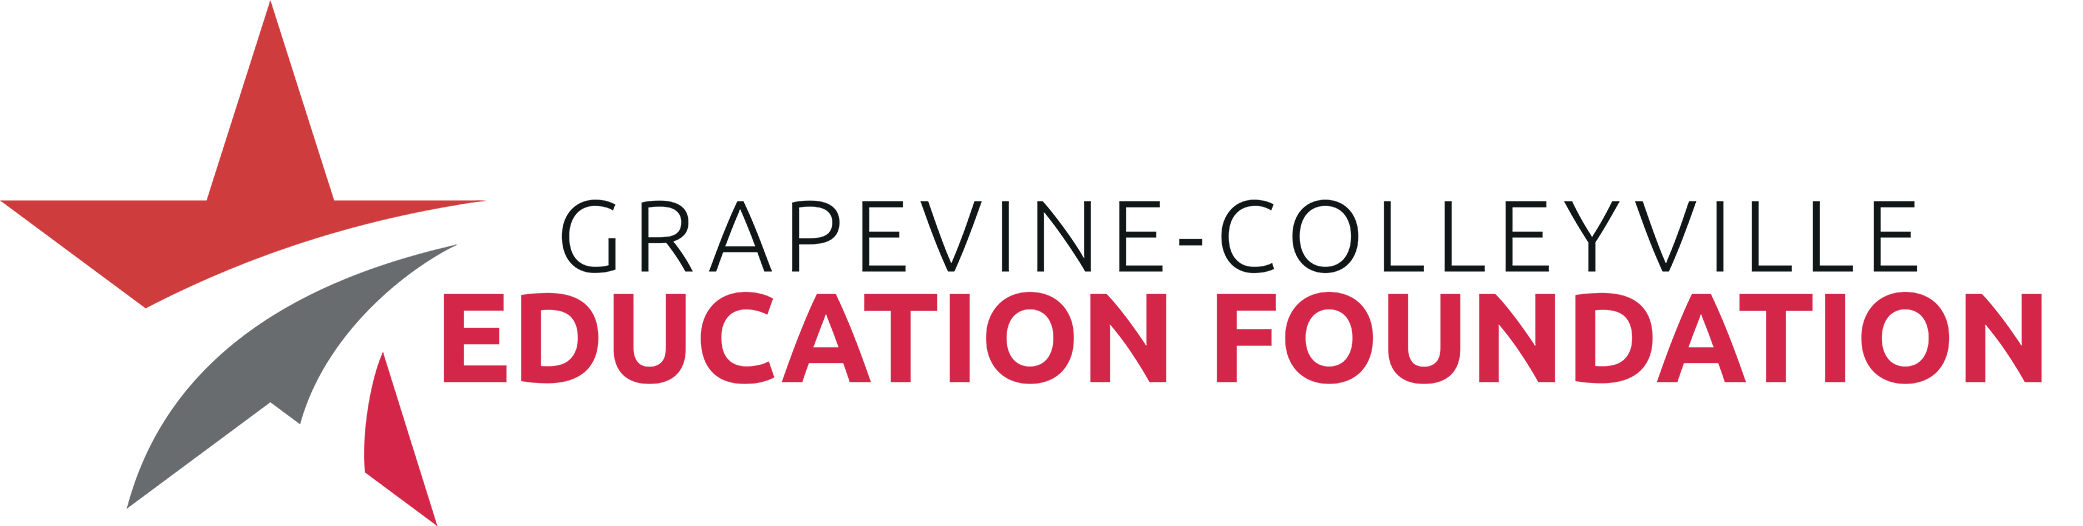 Grapevine-Colleyville Education Foundation GCEF